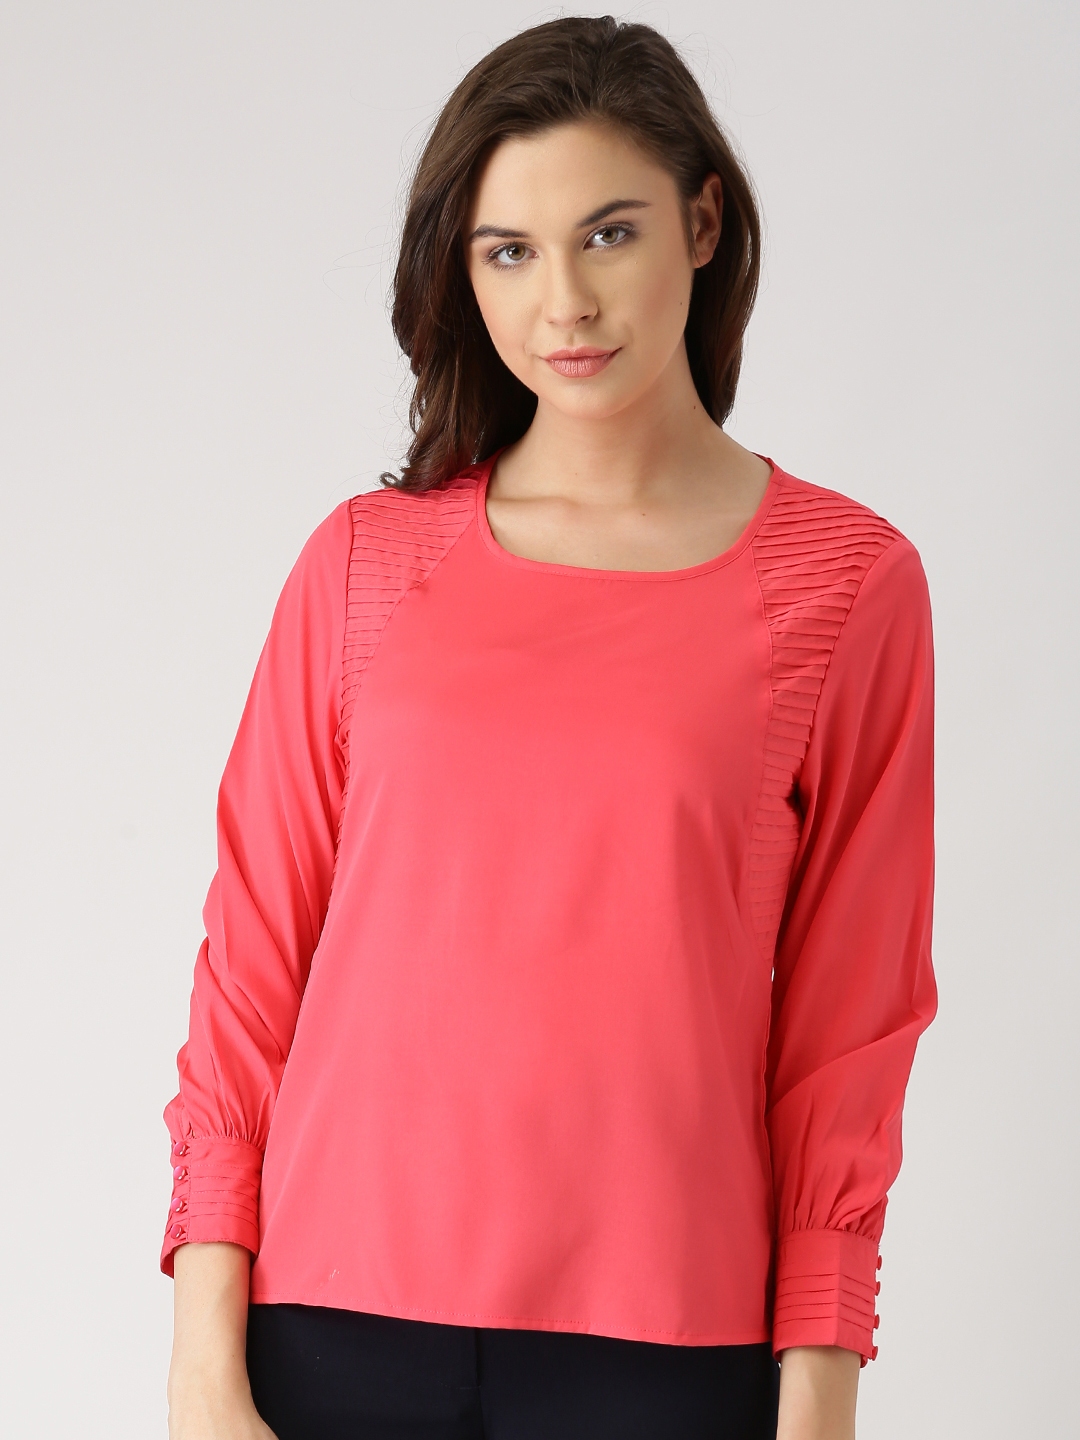 Buy Marie Claire Women Coral Pink Solid Top - Tops for Women 1853759 ...